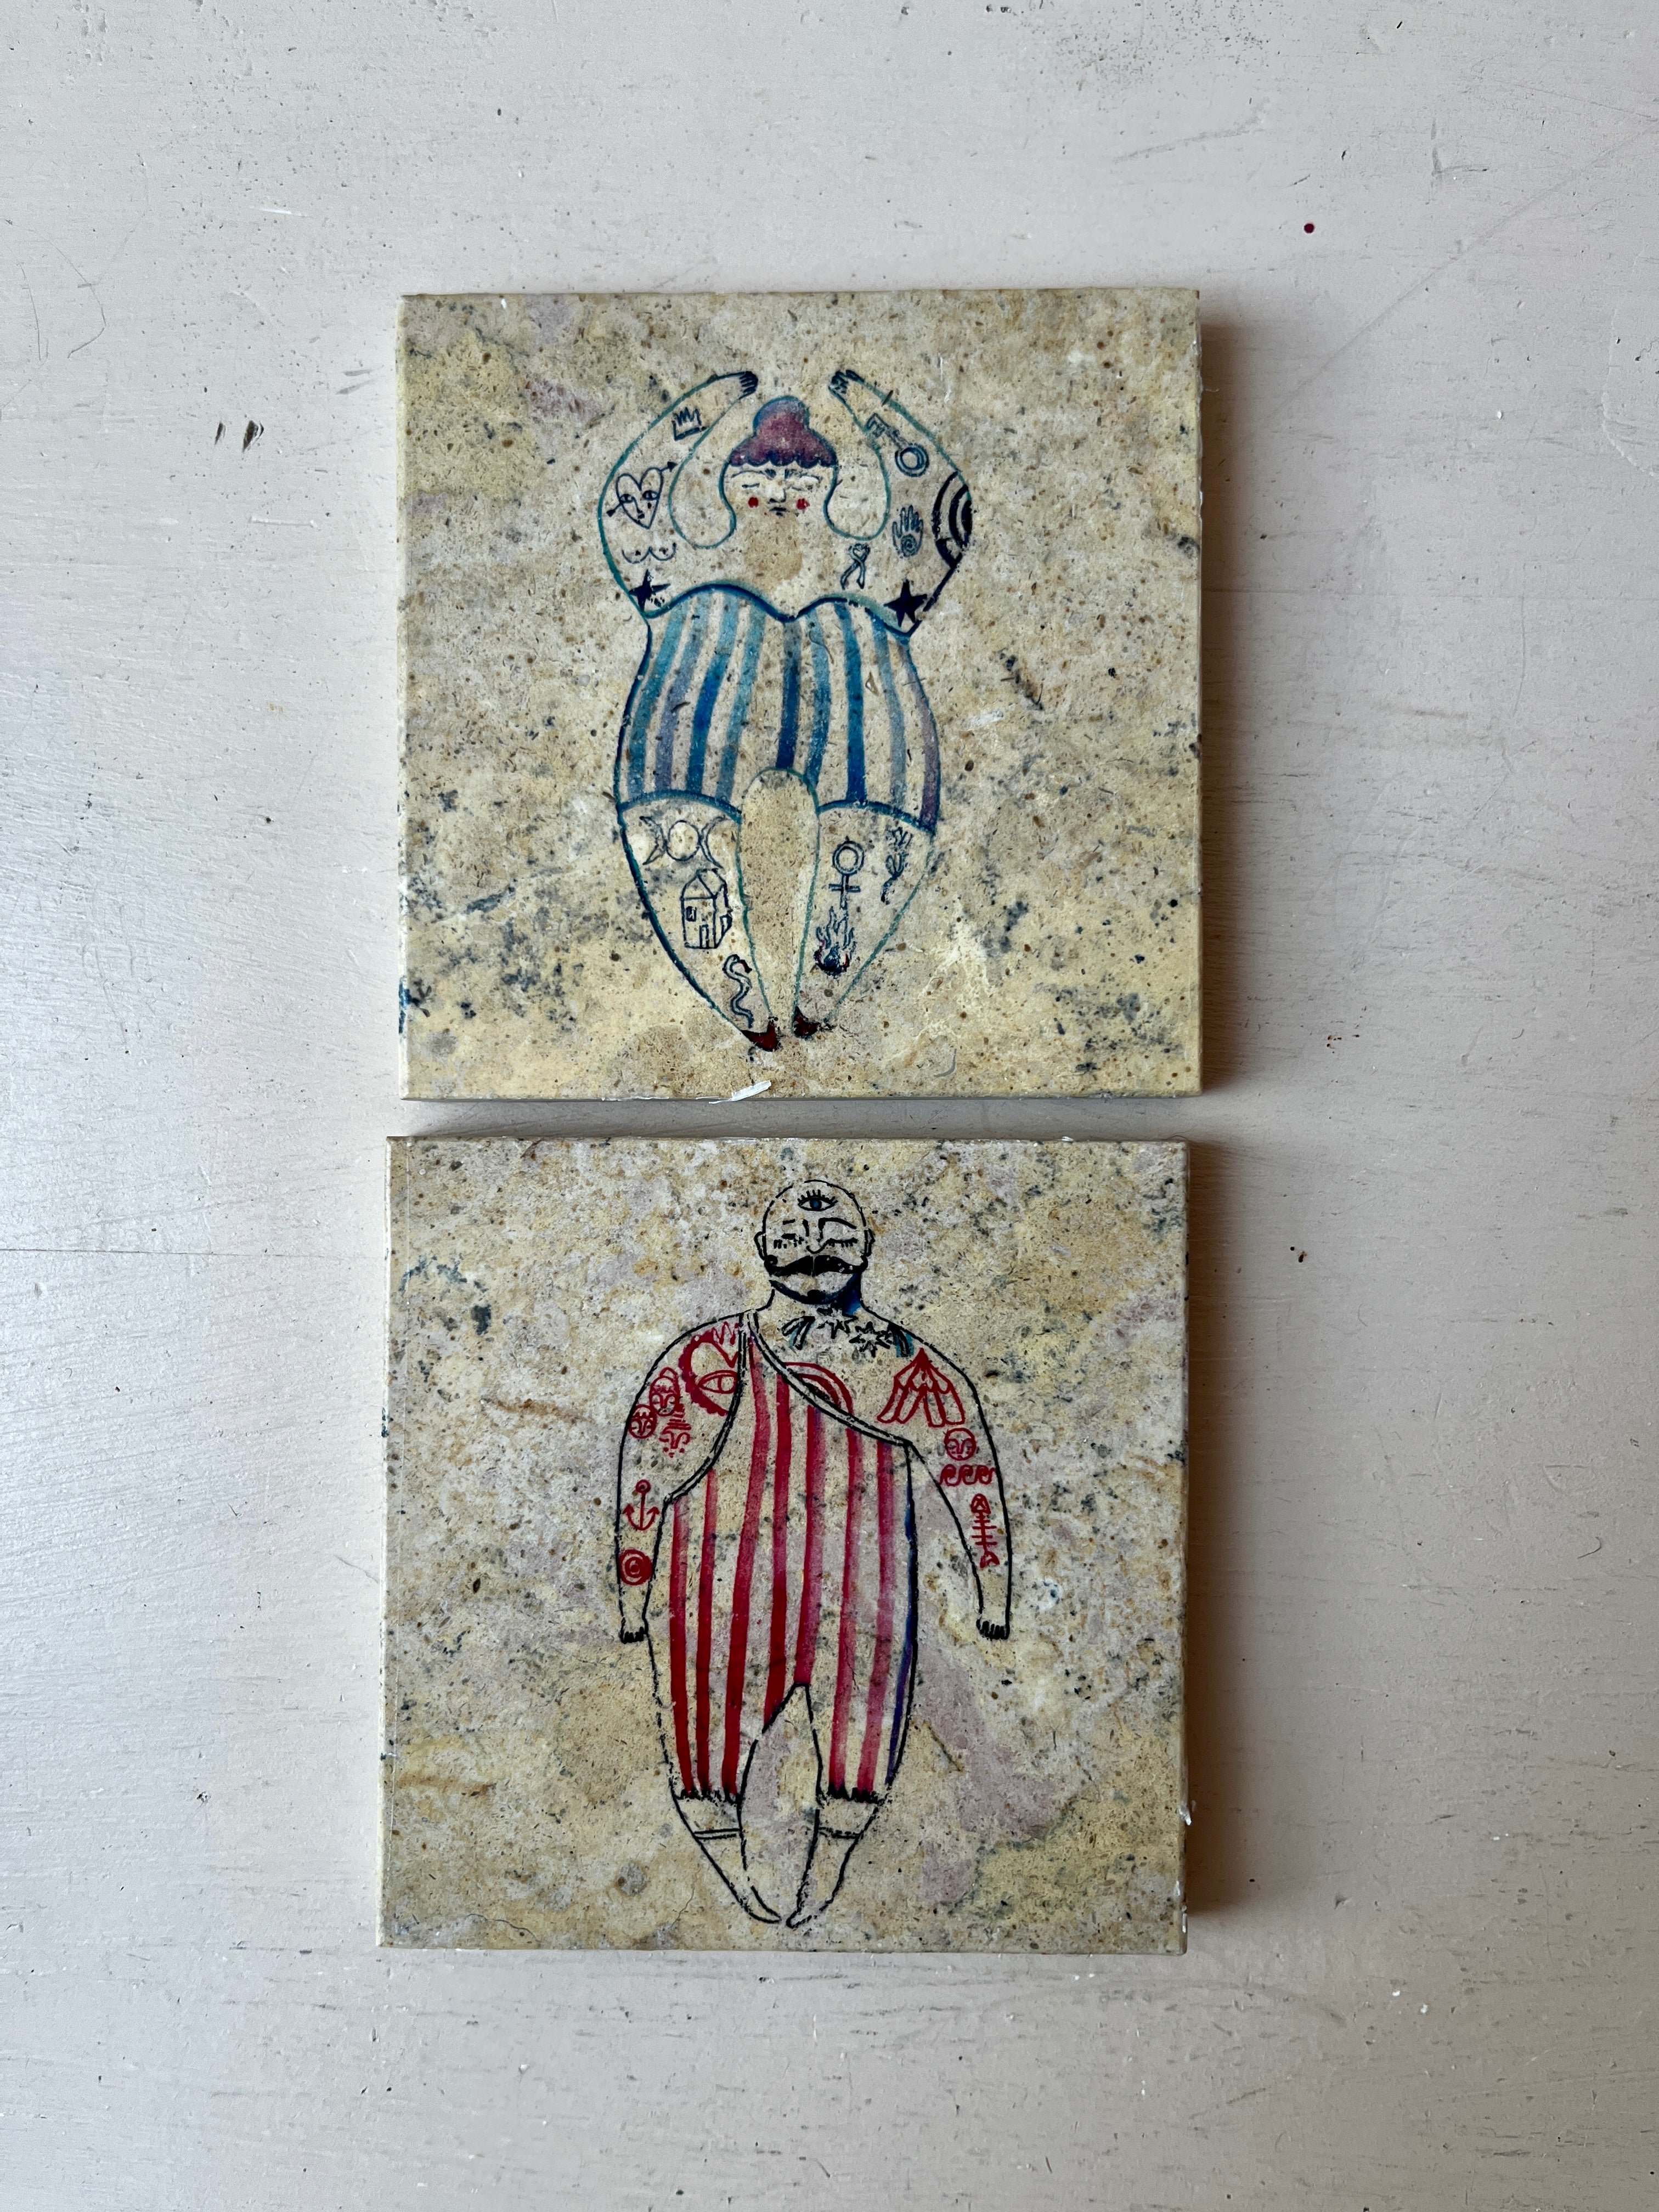 Strong Folk Tiles Illustrated by Skippy Cotton